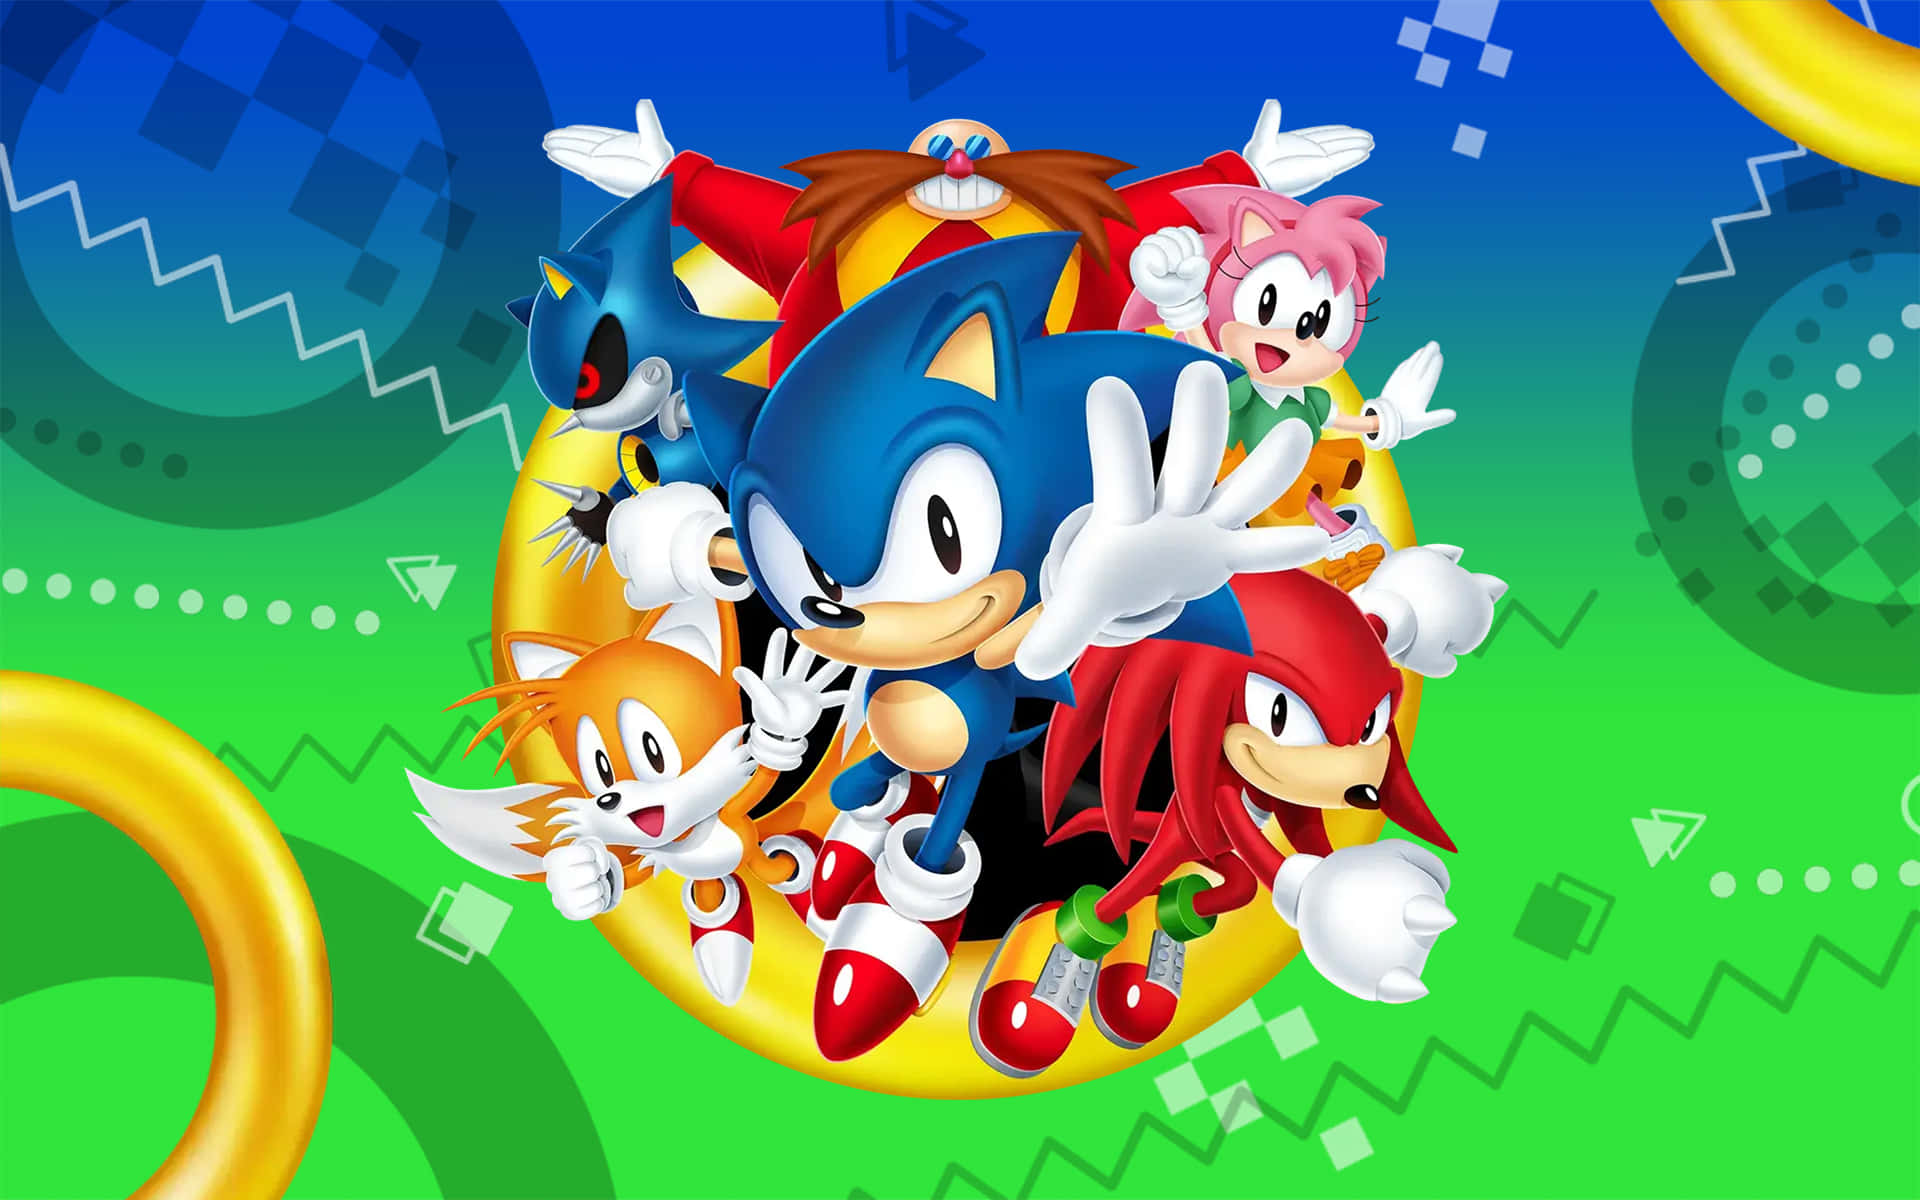 Classic Sonic Strikes a Pose in Colorful HD Wallpaper Wallpaper